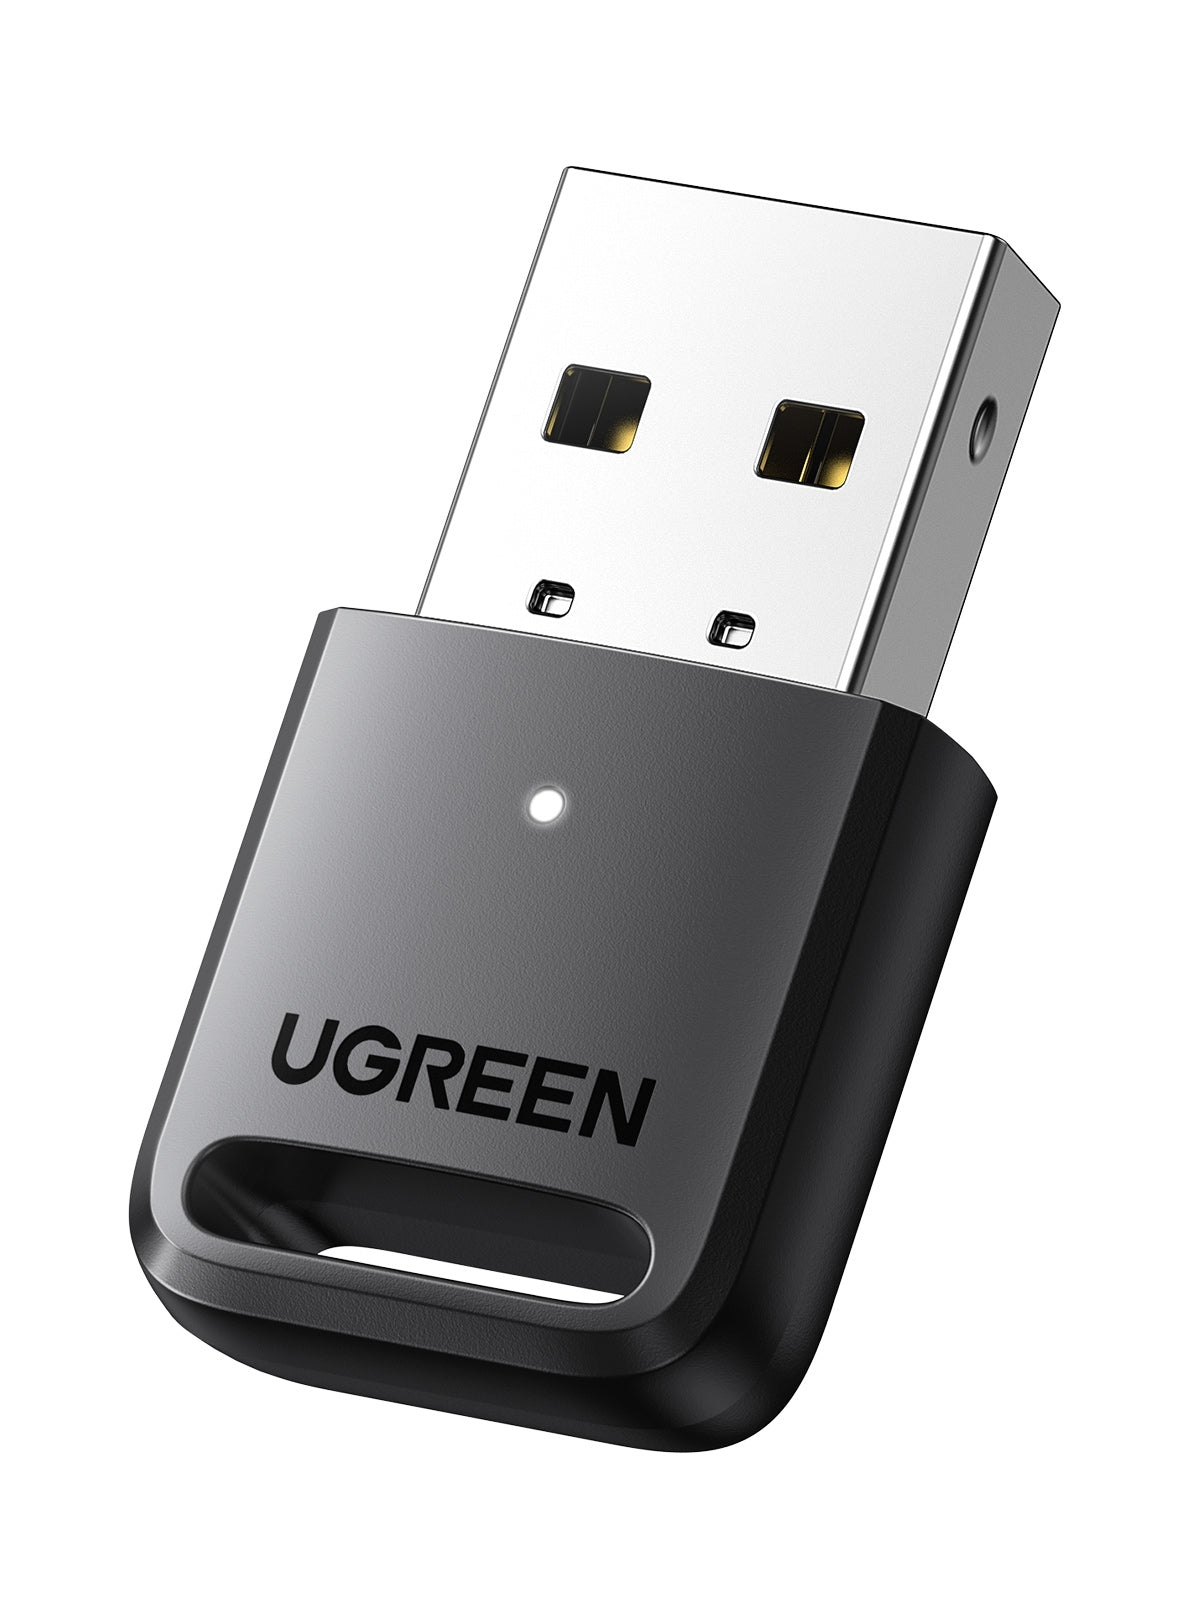 Buy Best and Affordable USB Gadgets in Australia